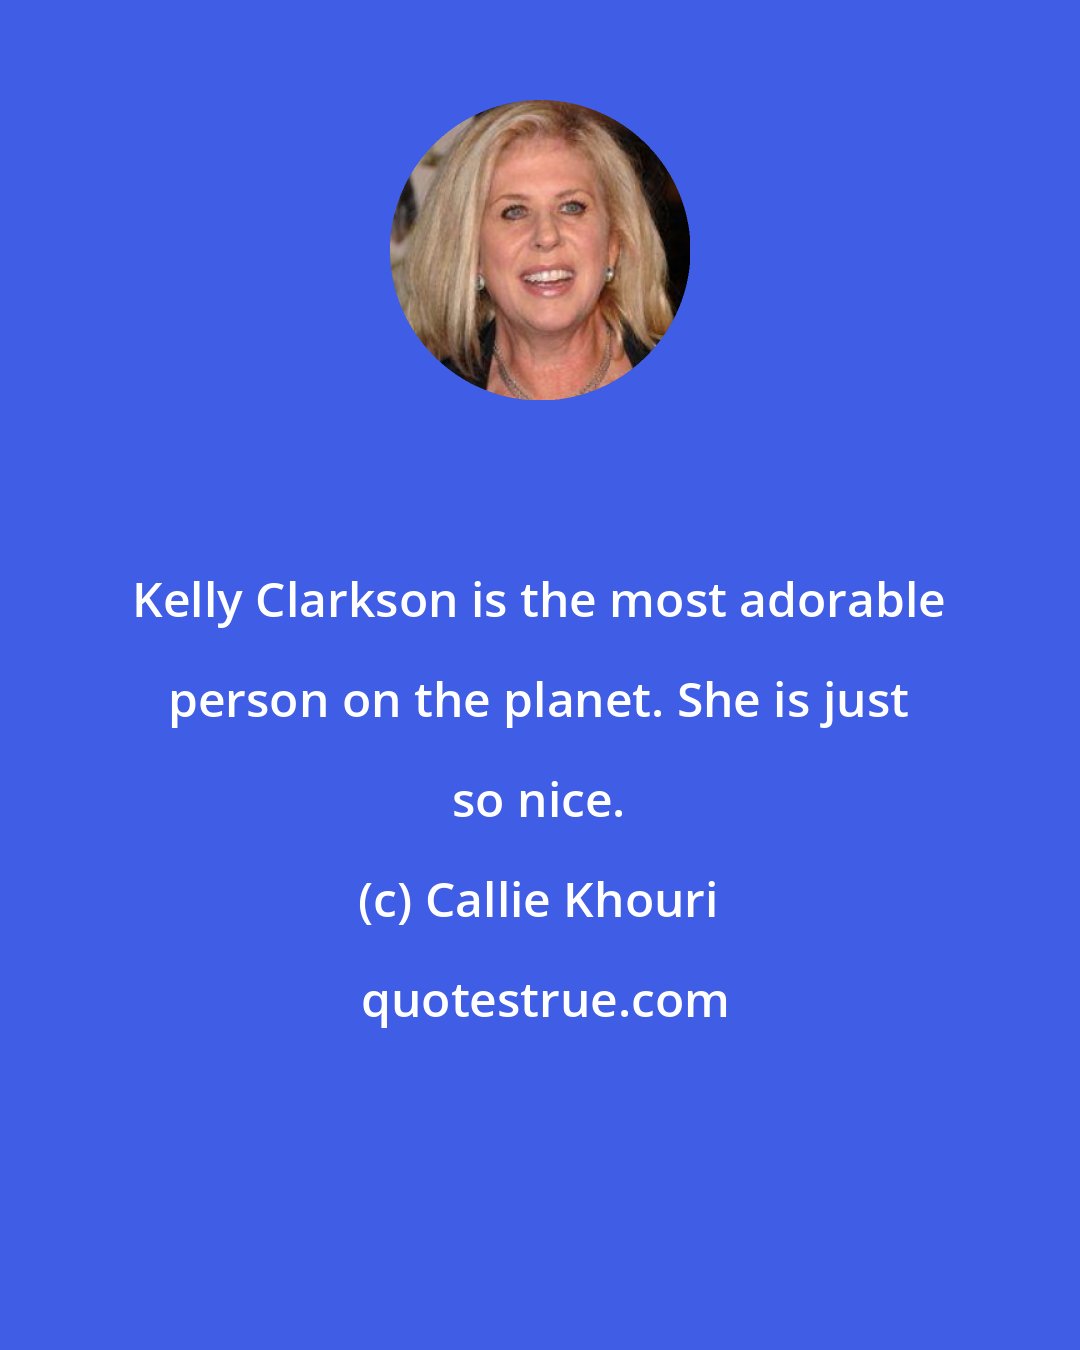 Callie Khouri: Kelly Clarkson is the most adorable person on the planet. She is just so nice.